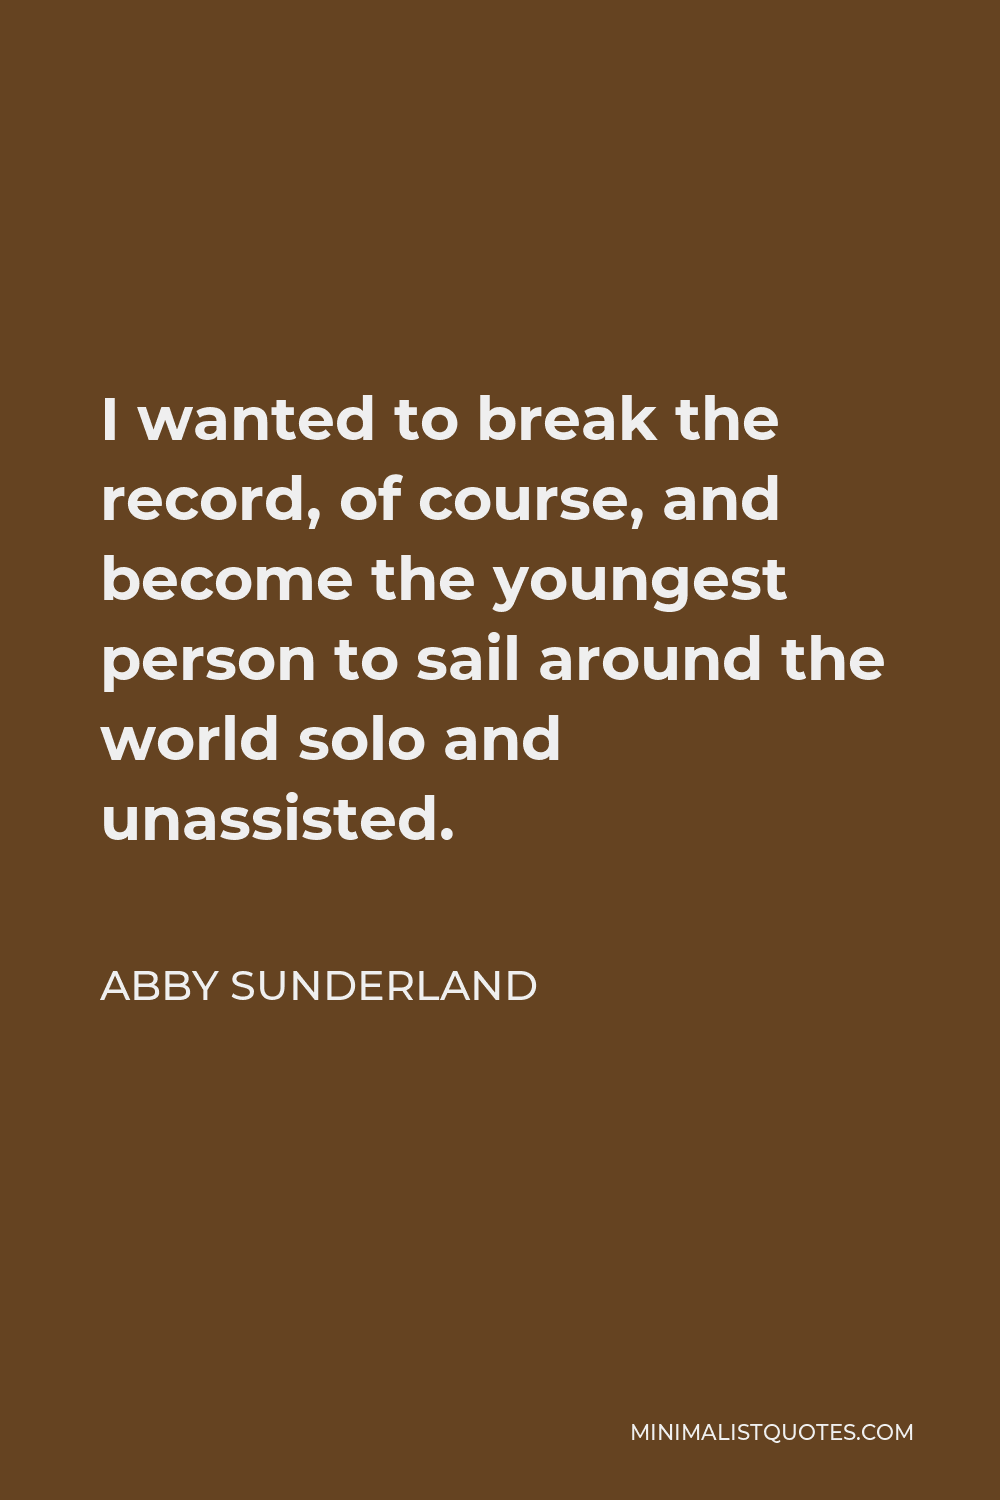 Abby Sunderland Quote - I wanted to break the record, of course, and become the youngest person to sail around the world solo and unassisted.